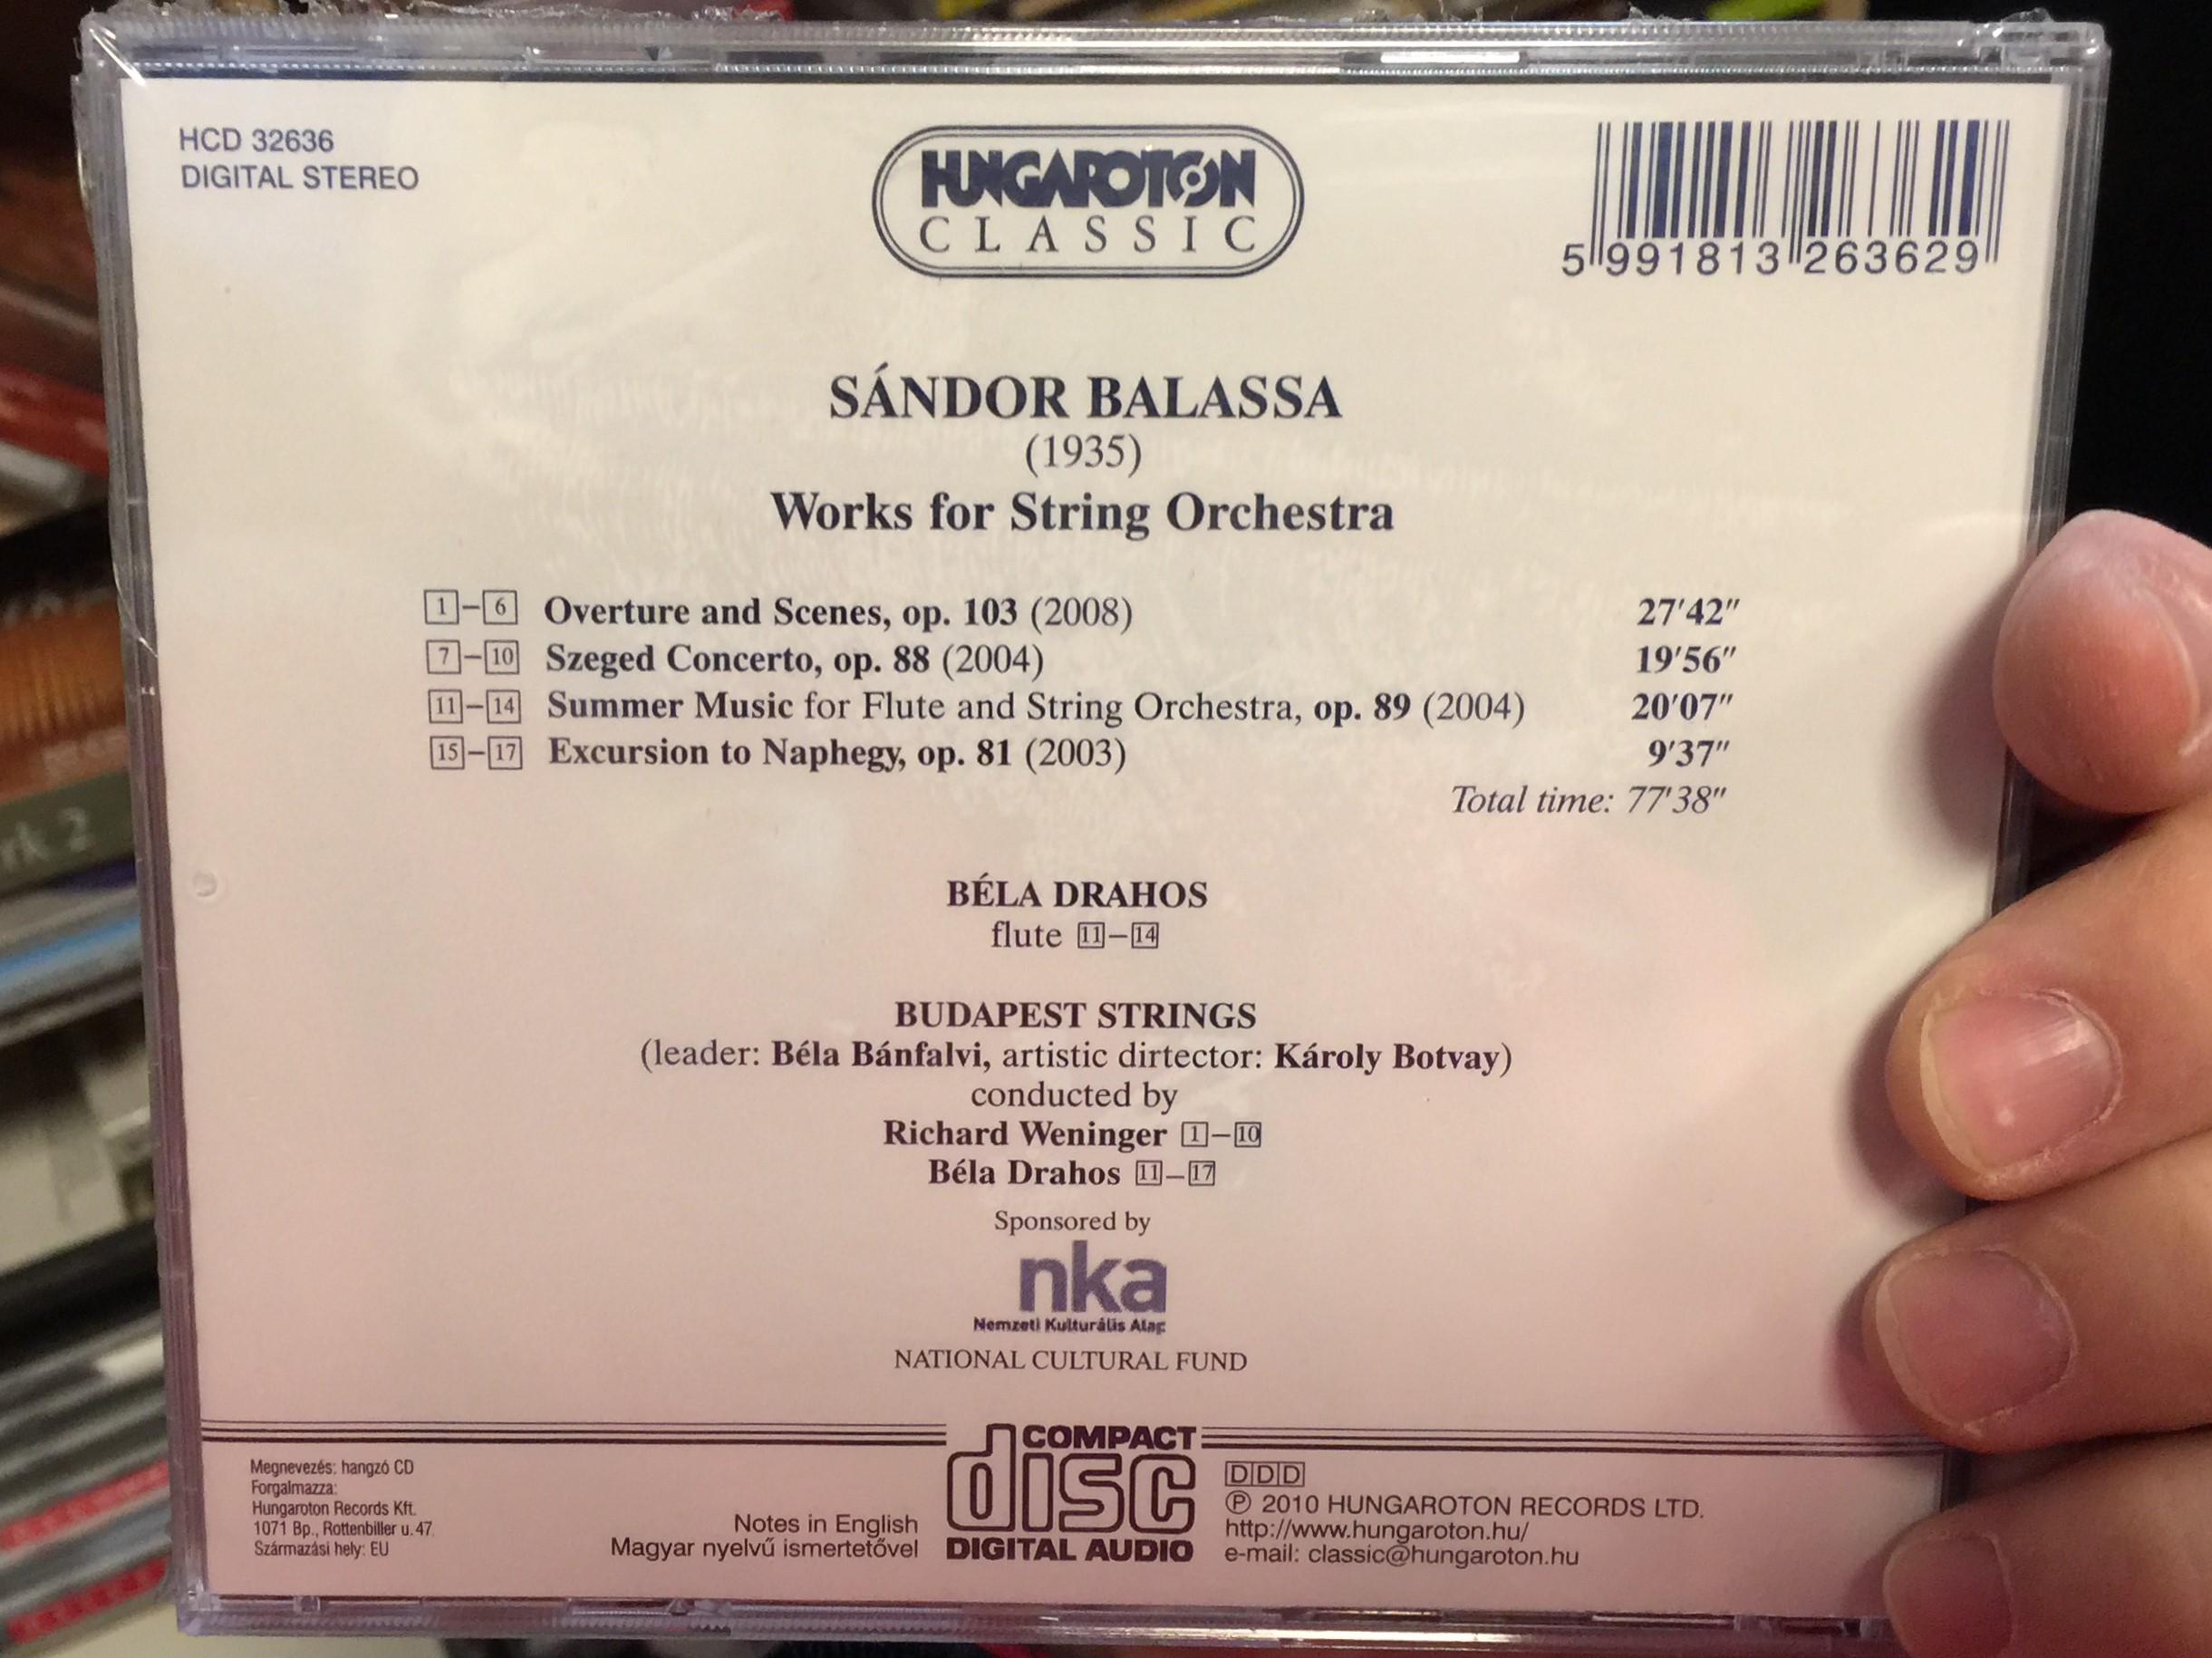 sandor-balassa-szeged-concerto-op.-88-overture-and-scenes-op.-103-excursion-to-naphegy-op.-81-summer-music-for-flute-and-string-orchestra-op.-89-hungaroton-classic-audio-cd-2010-stereo-h.jpg